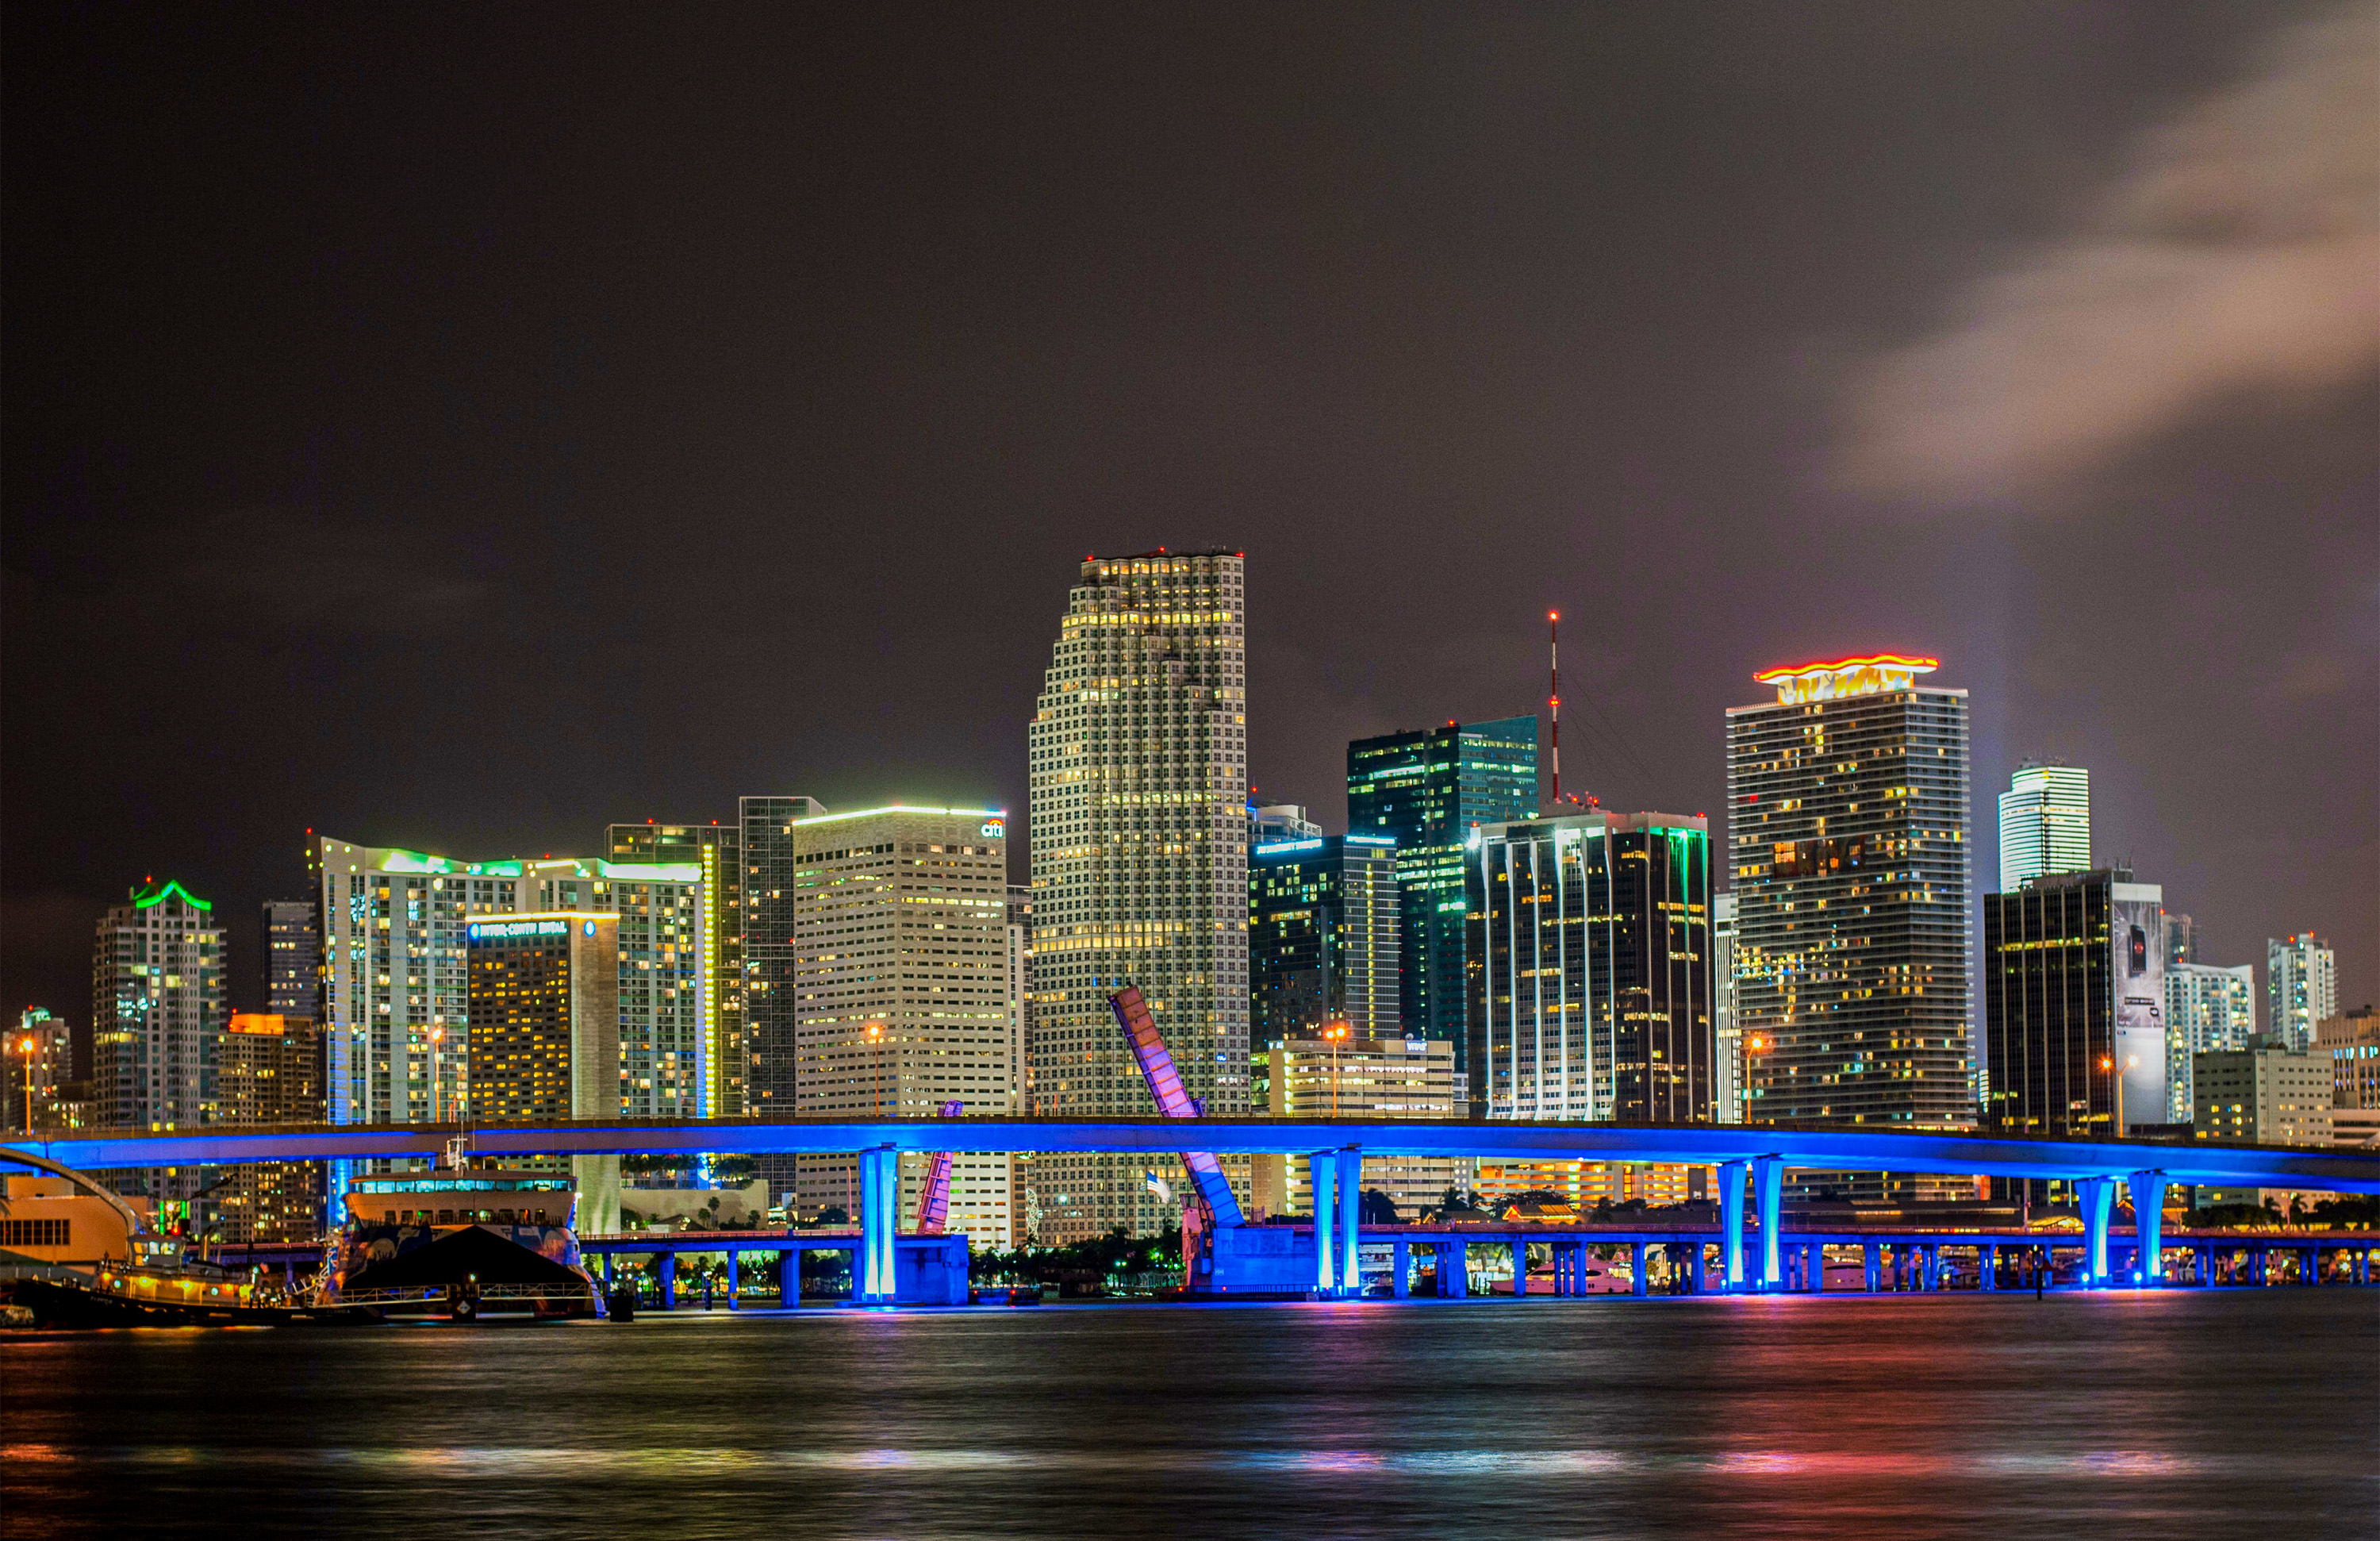 Miami, Florida high-rise buildings at nighttime